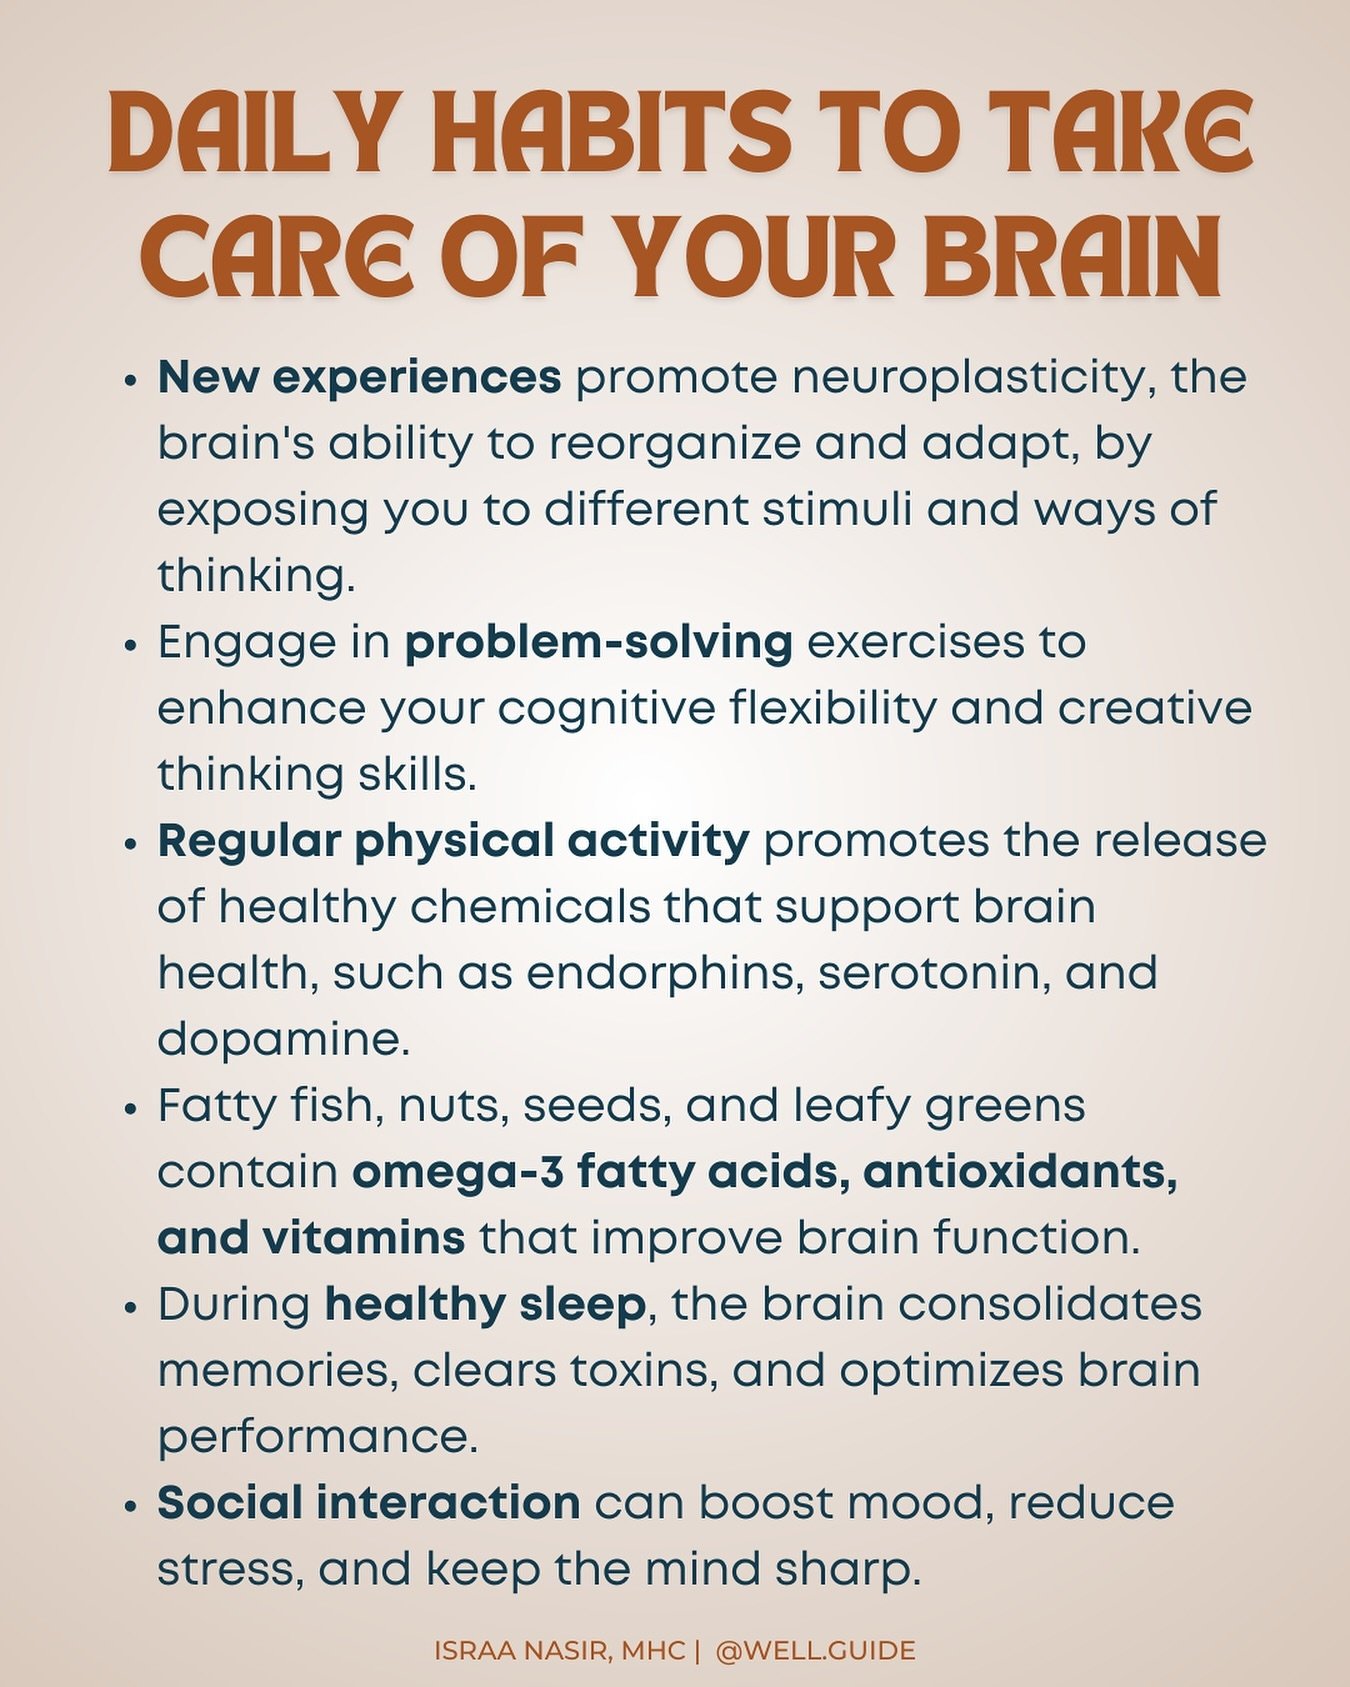 Your body is not the only thing that needs taking care of. Your brain needs caring as well through your habits. 
.
.
.
#wellguide #brainhealthmatters #cognitivepsychology #cognitivescience #cbttherapy #healthyhabits #healthybrain #brainhealthtips